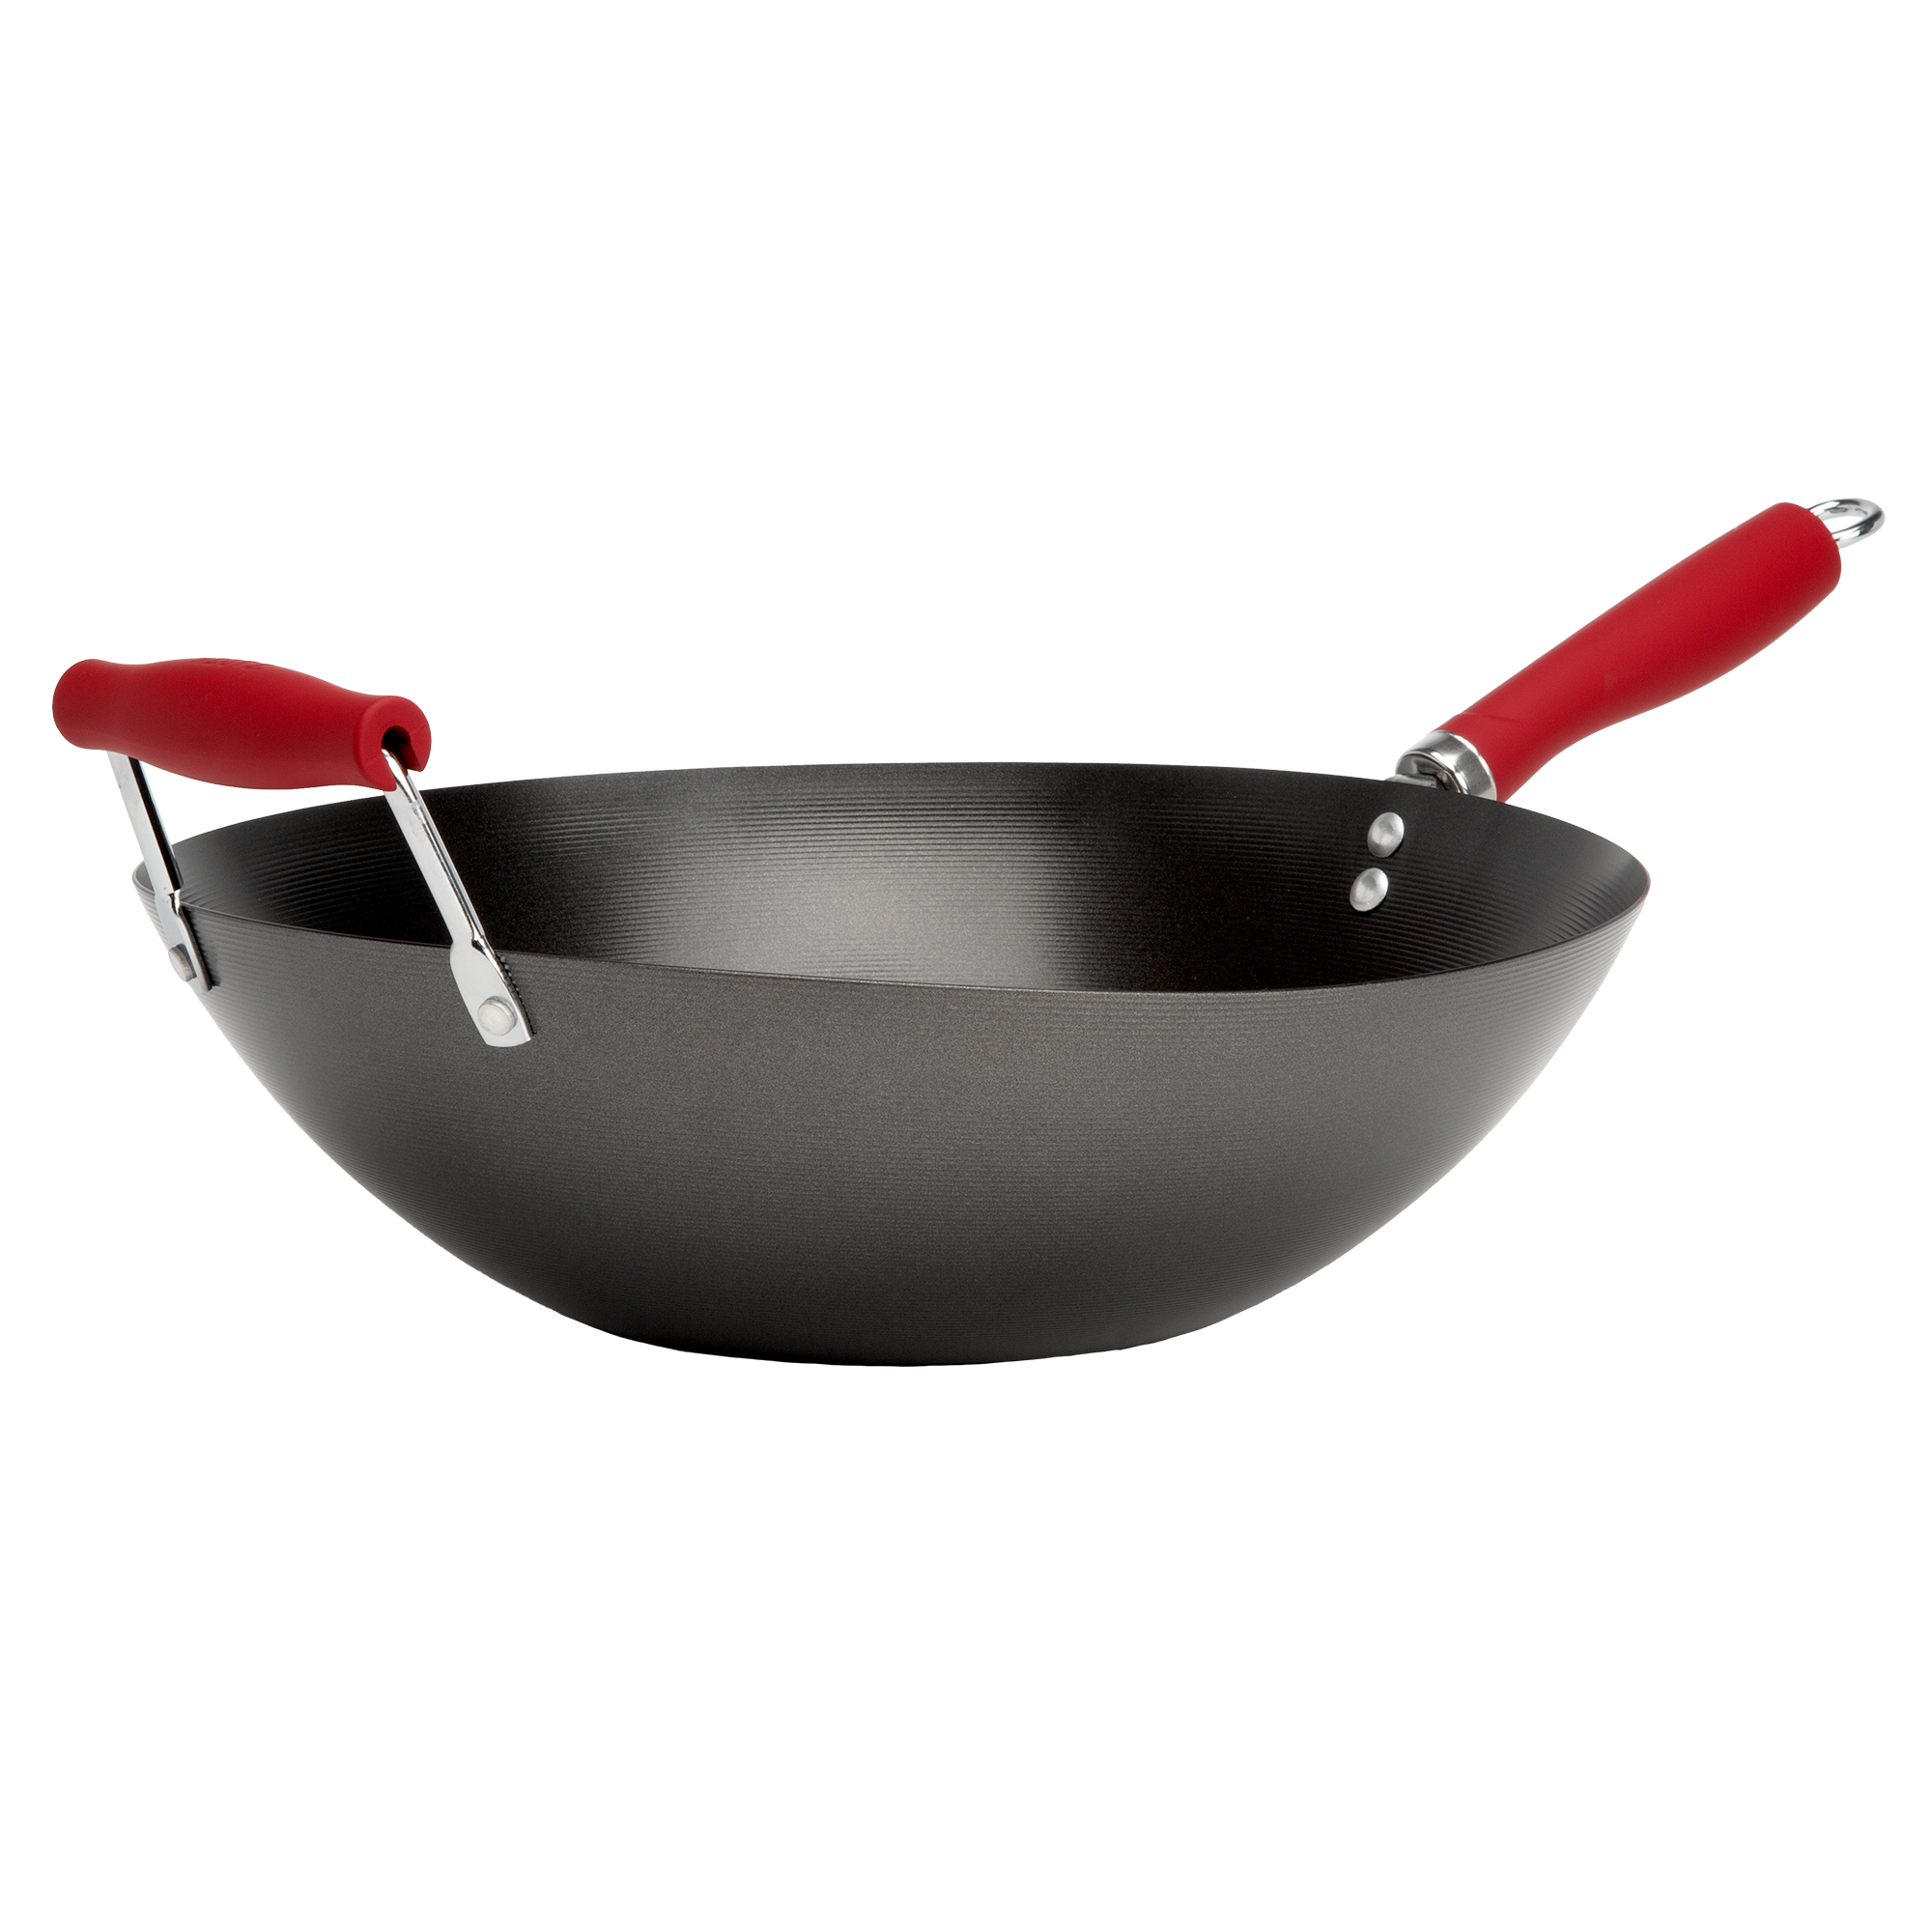 Tasty Carbon Steel Non-Stick Stir Fry Pan/Wok, 14 inch, Red - image 1 of 9